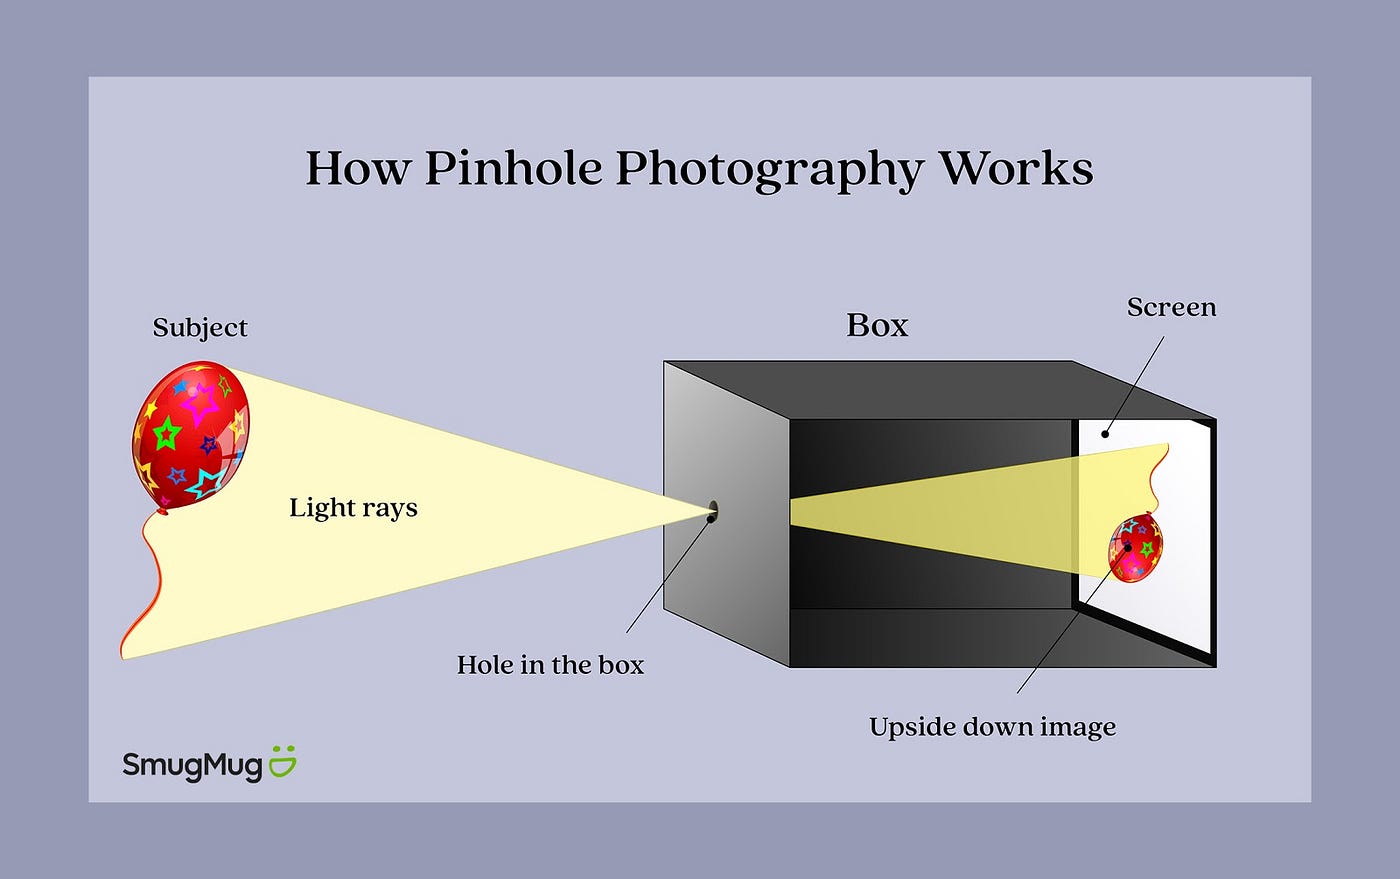 who invented the first pinhole camera